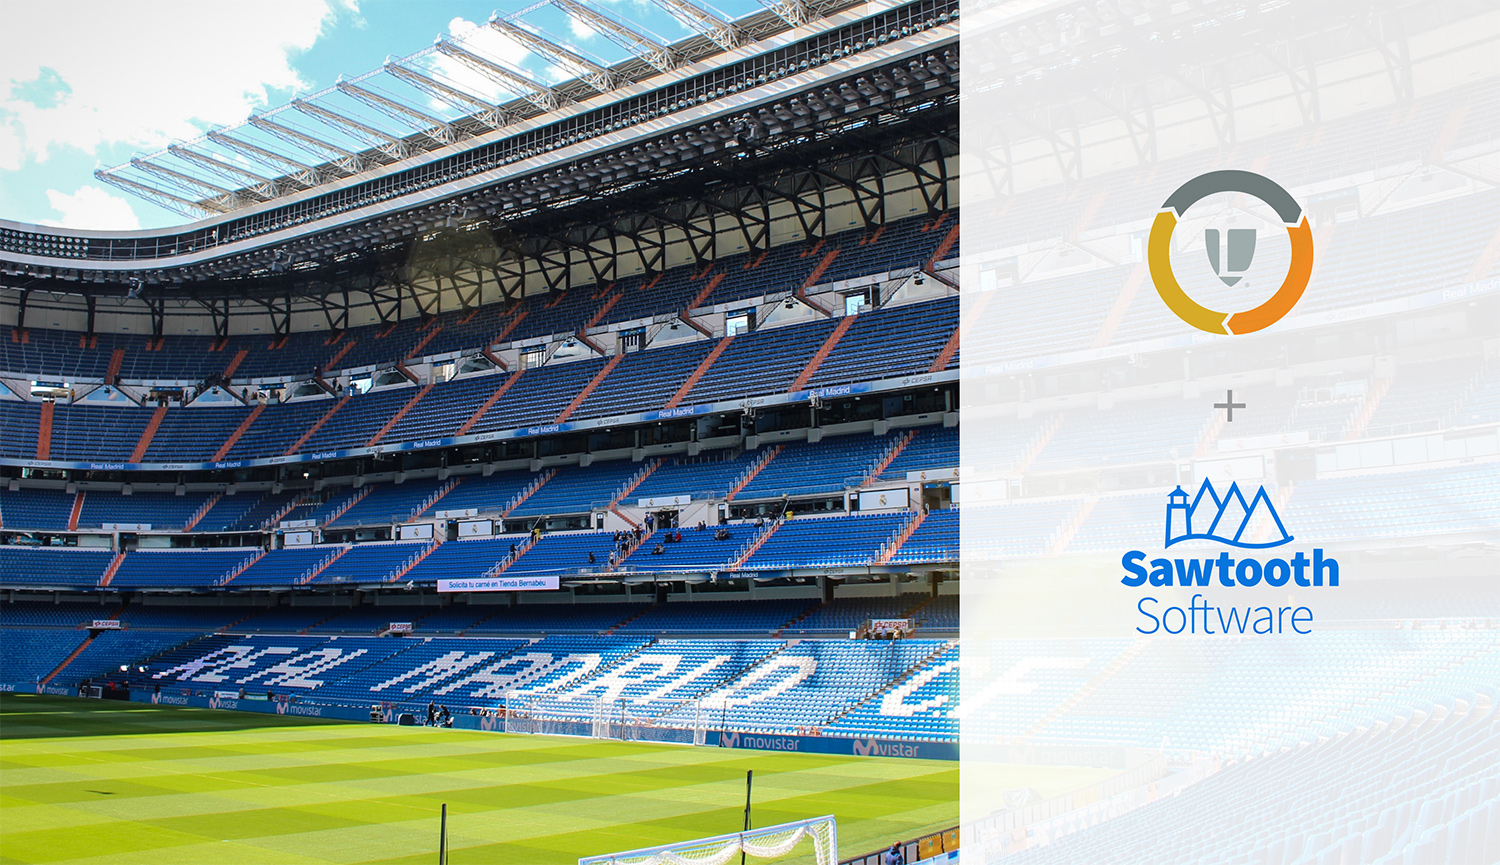 Real Madrid Stadium with Legends Hospitality and Sawtooth Software Logos